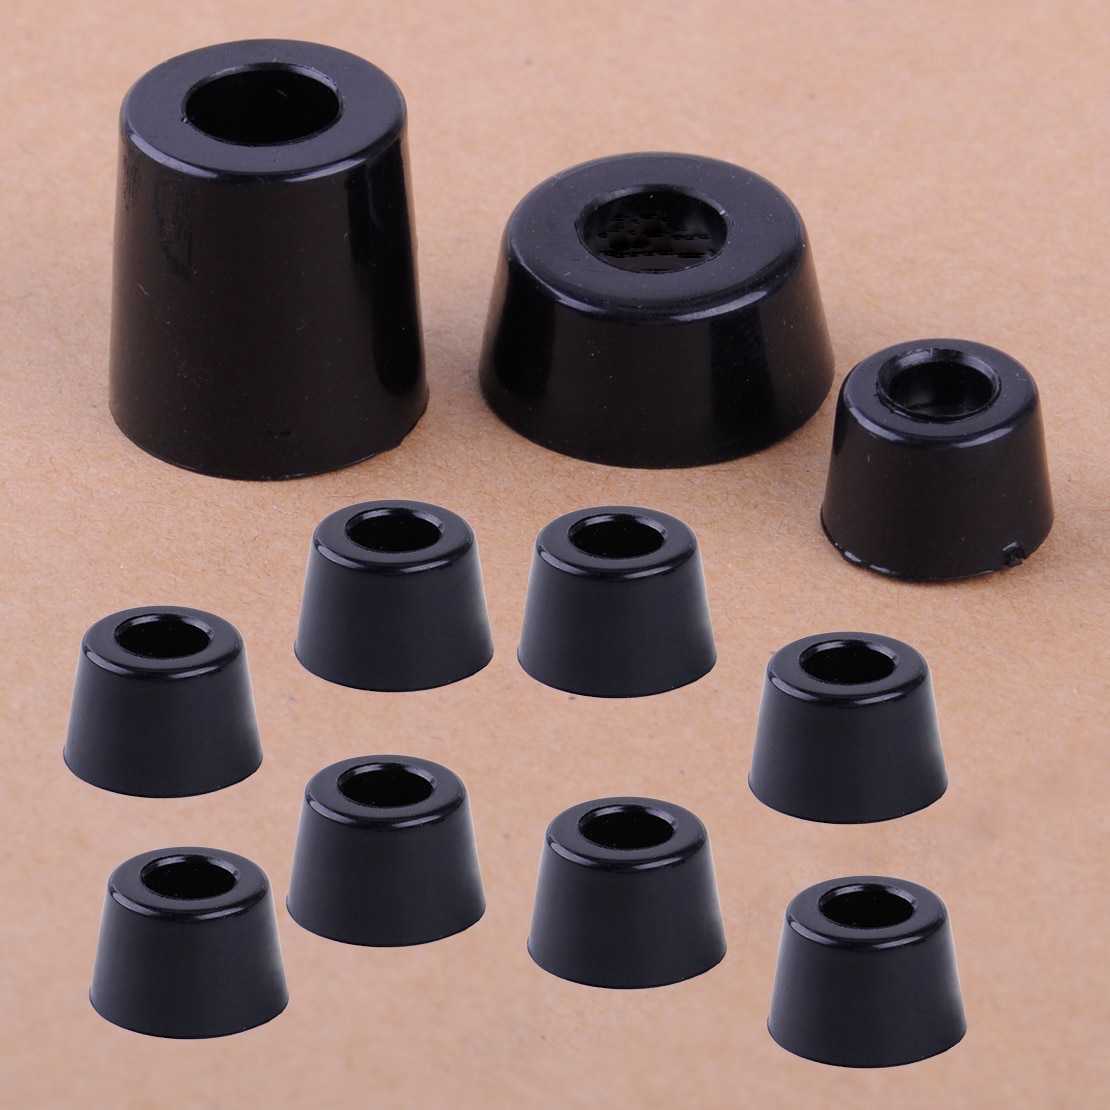 8pcs Black Speaker Cabinet Furniture Chair Table Box Conical Rubber Foot Pad Stand Shock Absorber S / M / L Skid Resistance